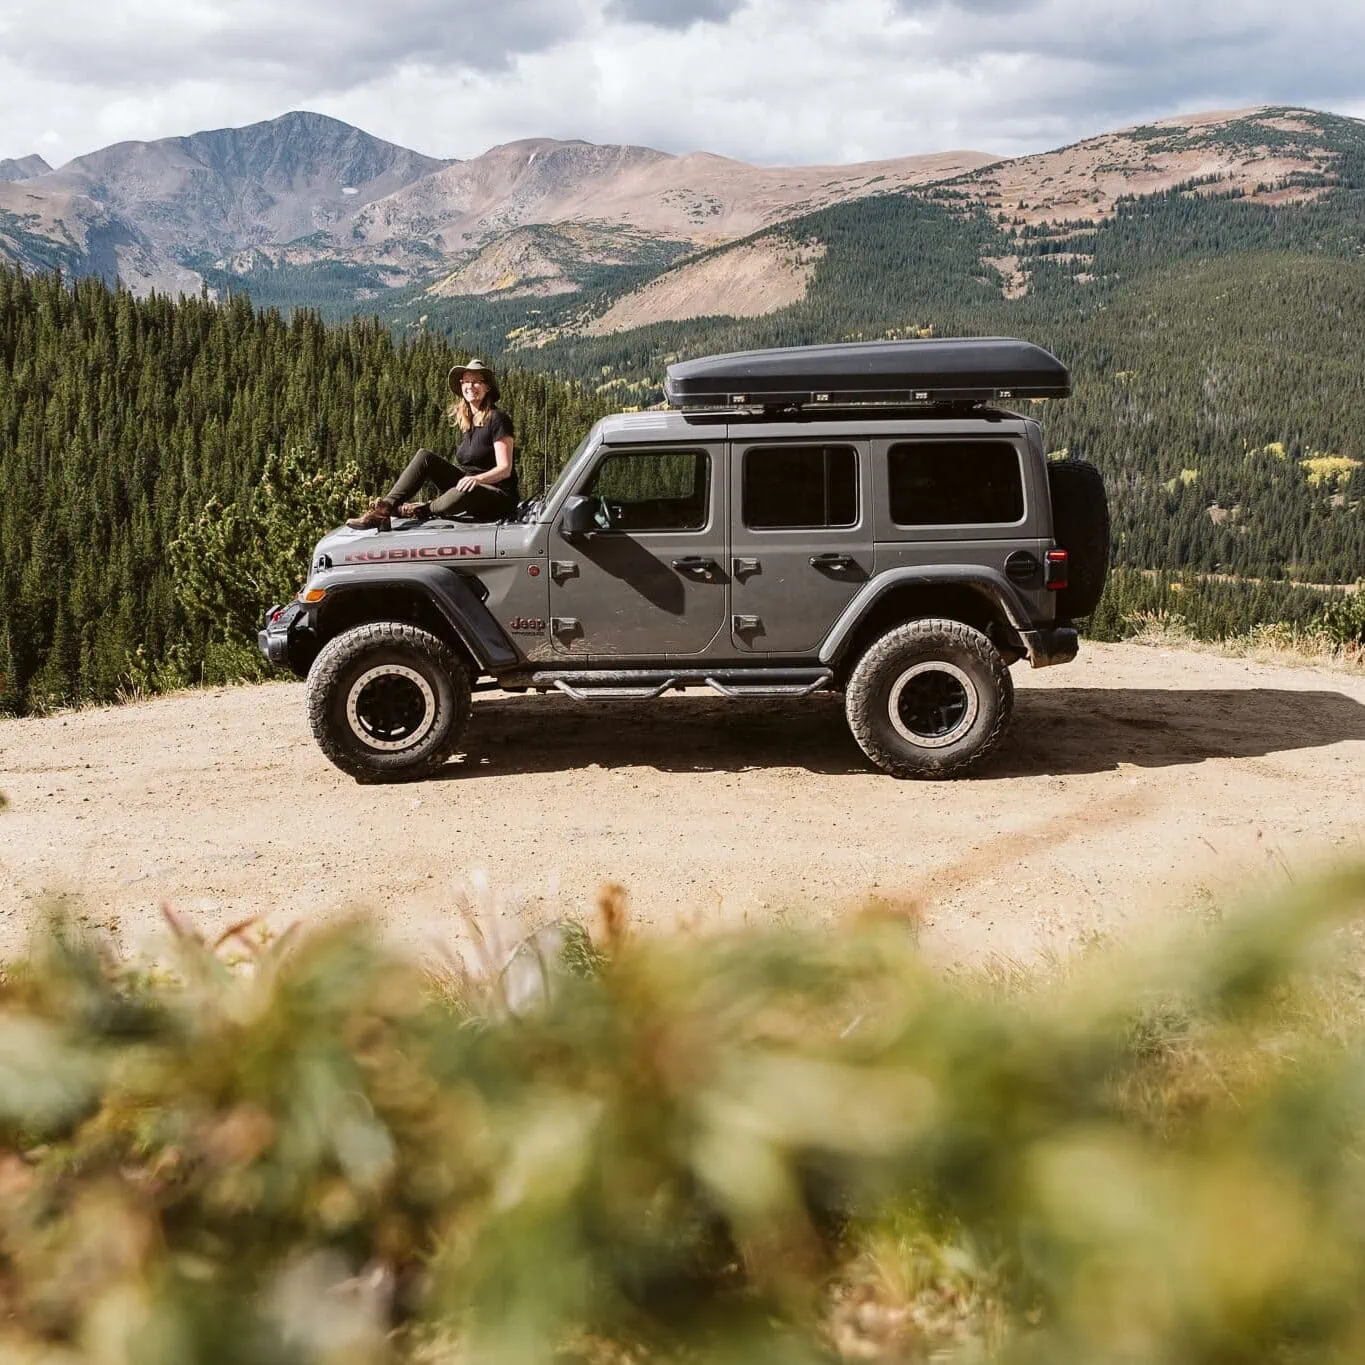 Nina Larsen Reed, sitting on the hood of a Jeep in the Colorado mountains